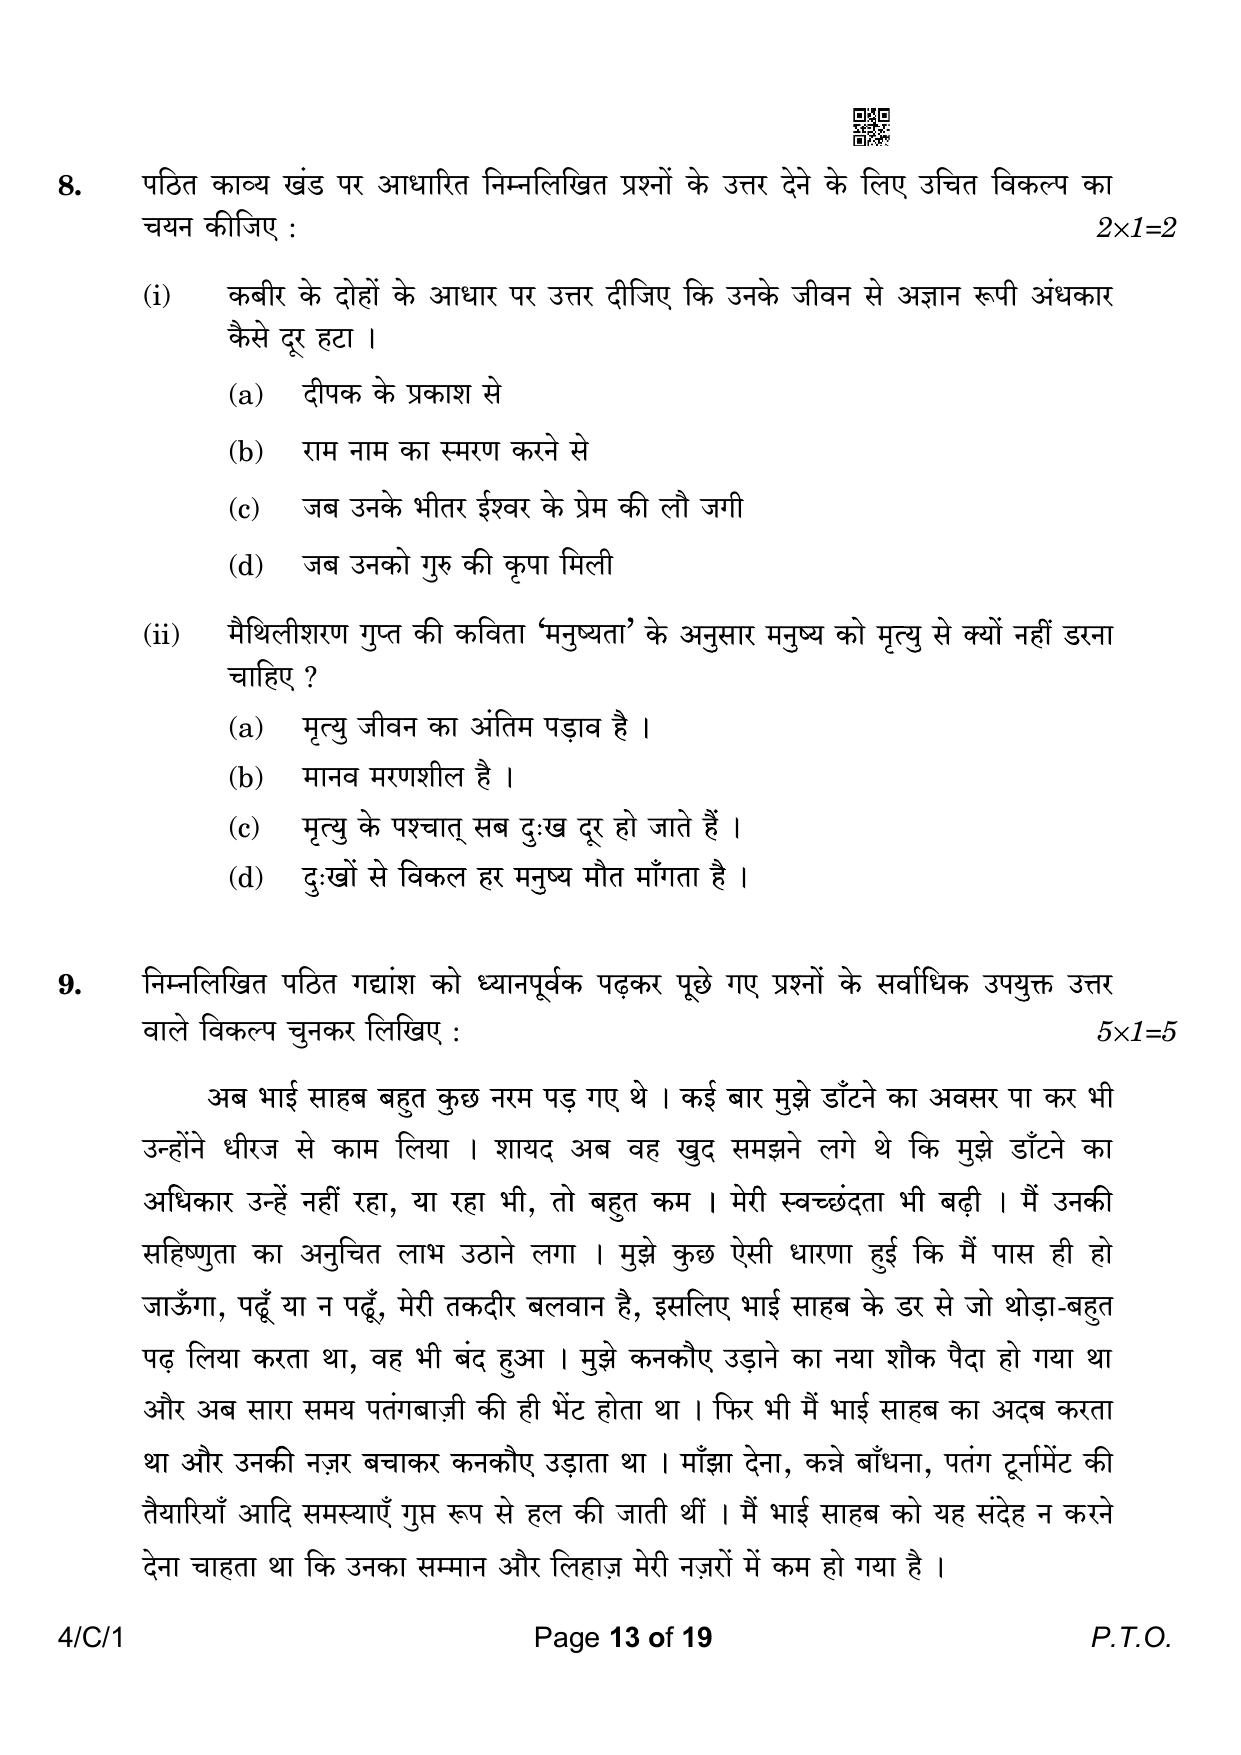 CBSE Class 10 4-1 Hindi B 2023 (Compartment) Question Paper - Page 13